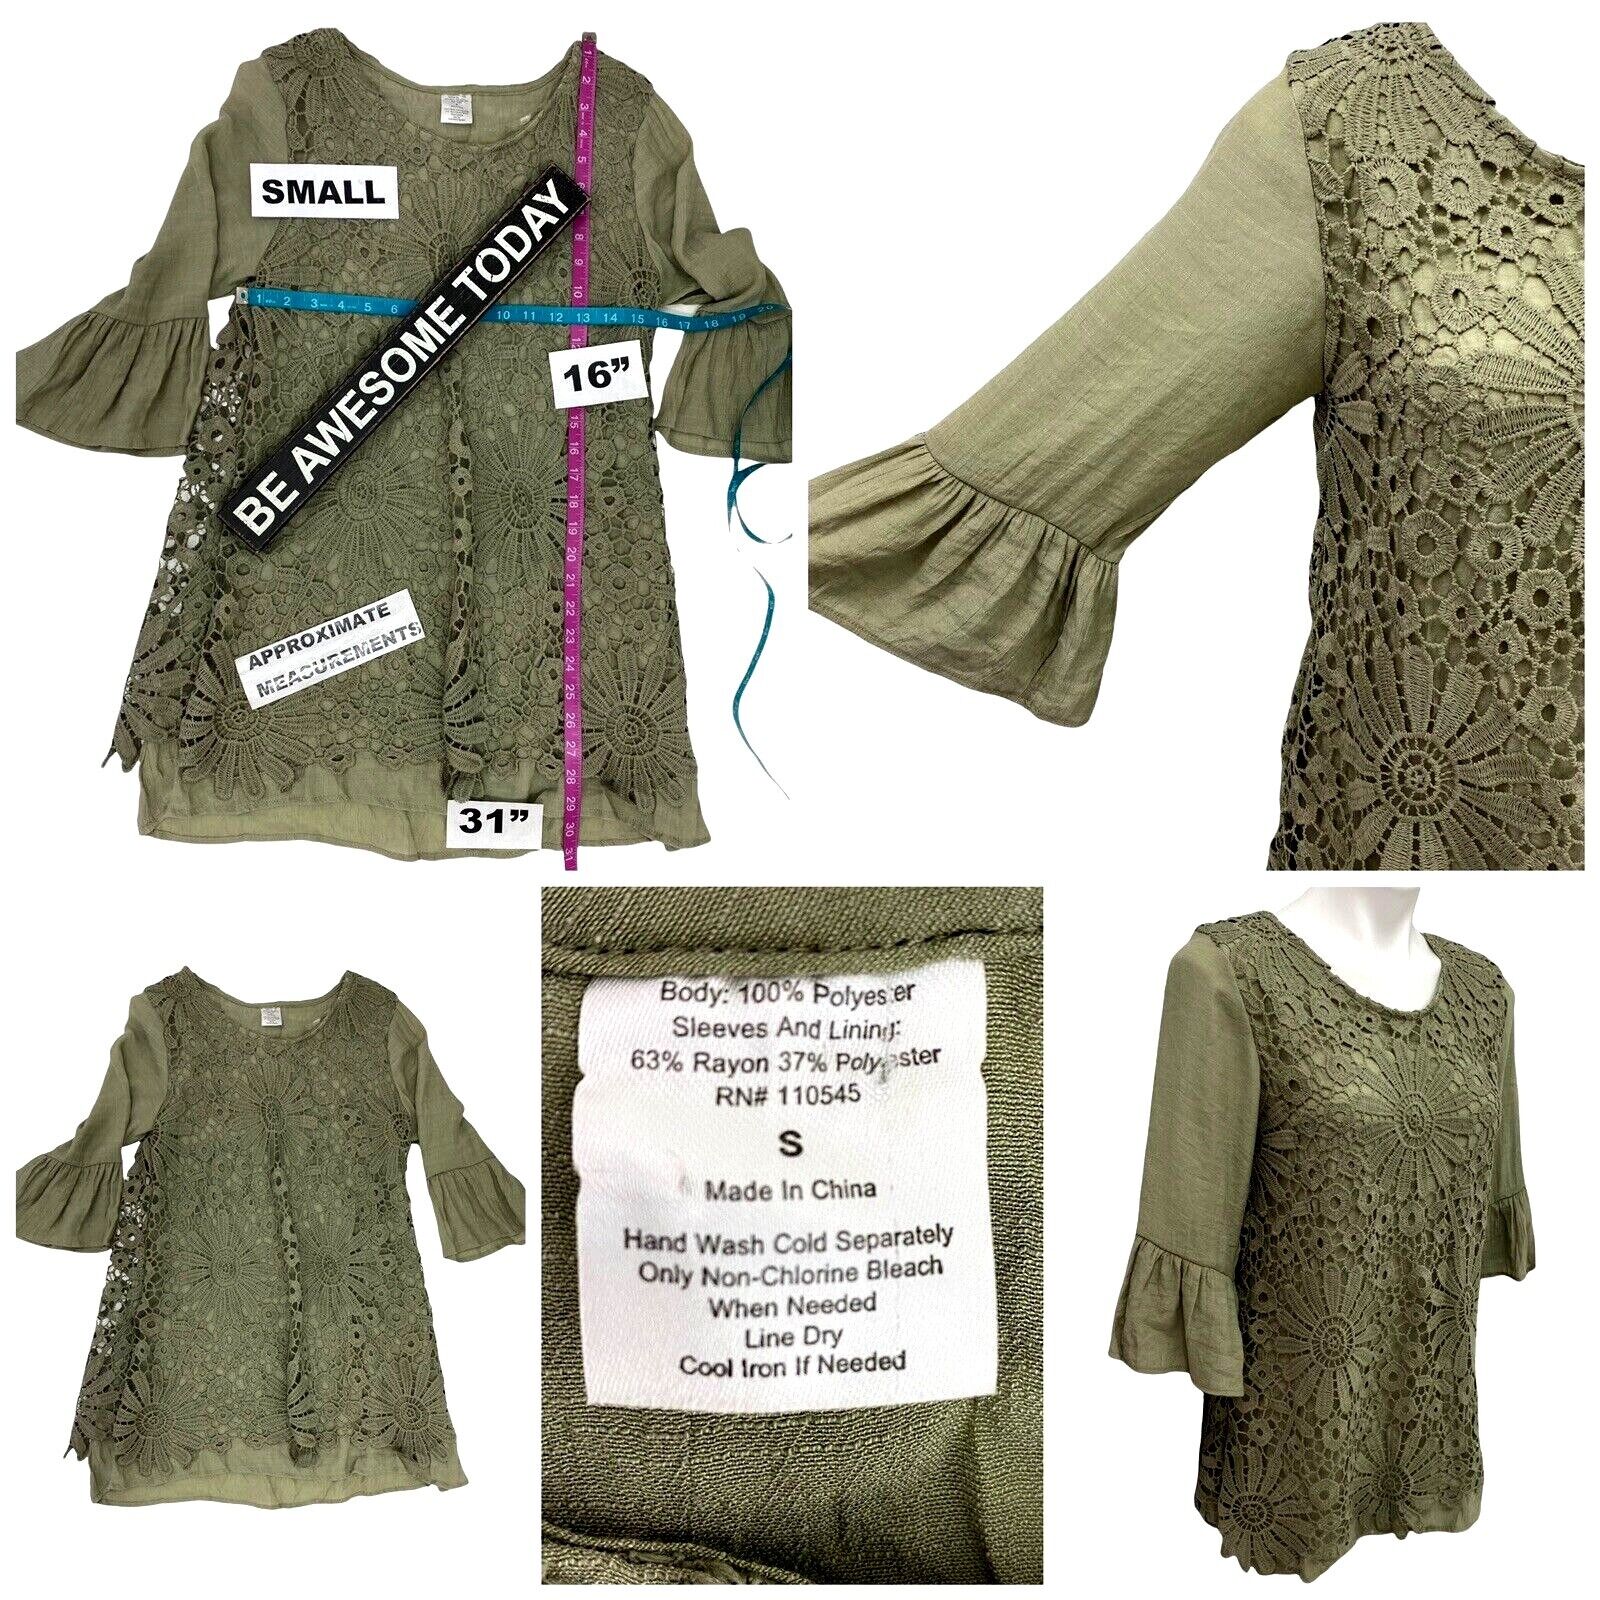 Lot of 3 Womens Top Anorak Jacket by Hinge Size Small Casual Lace Green Pullover hinge - фотография #3